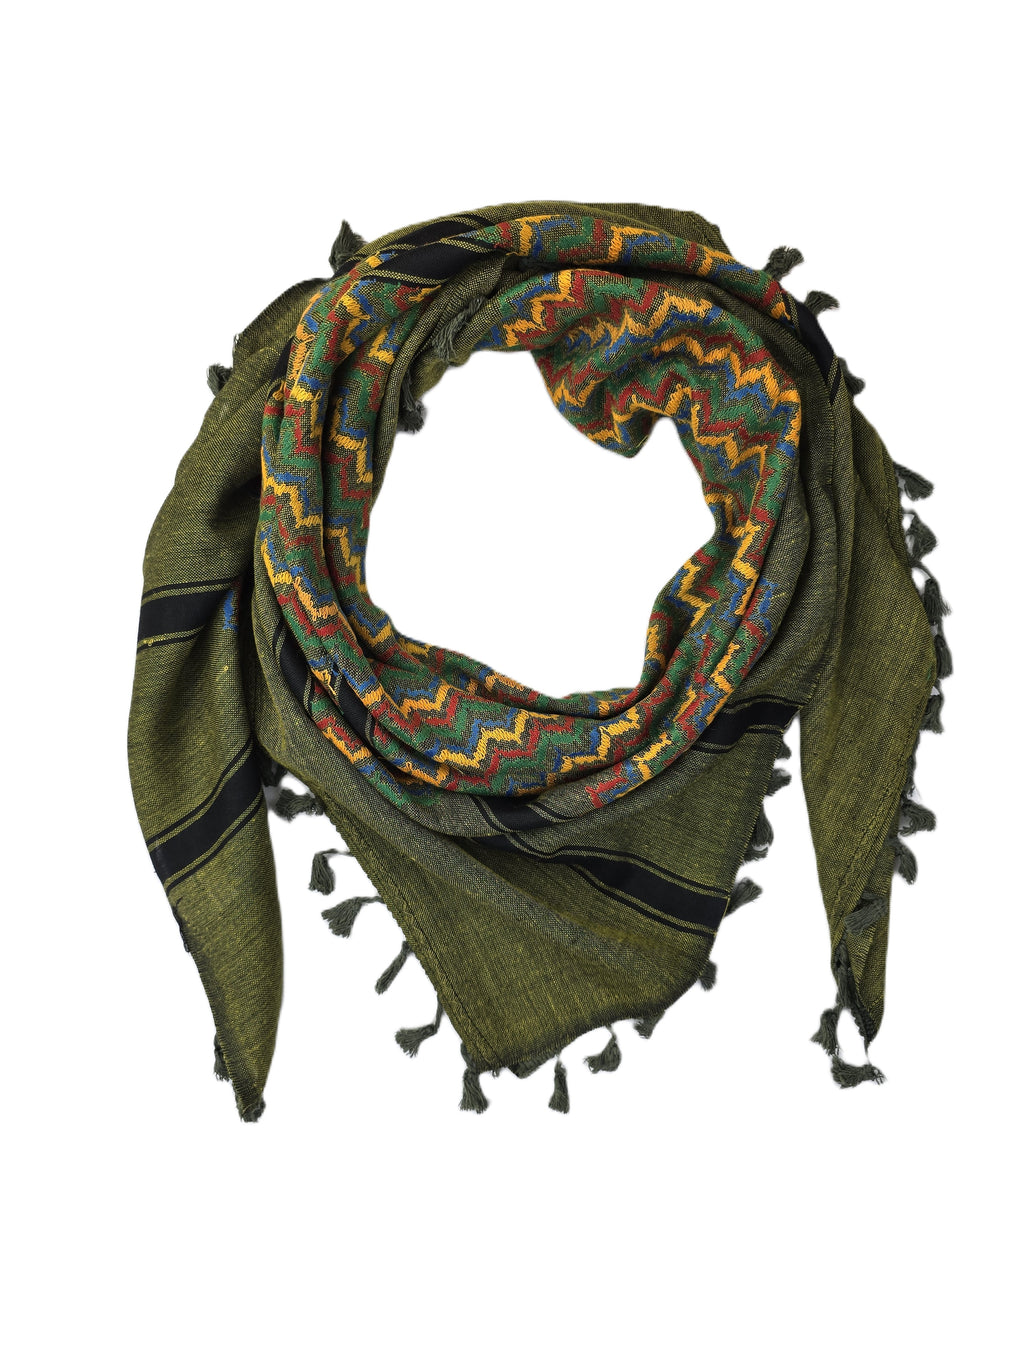 Keffiyeh Scarf Made in Palestine -  Colorful Olive